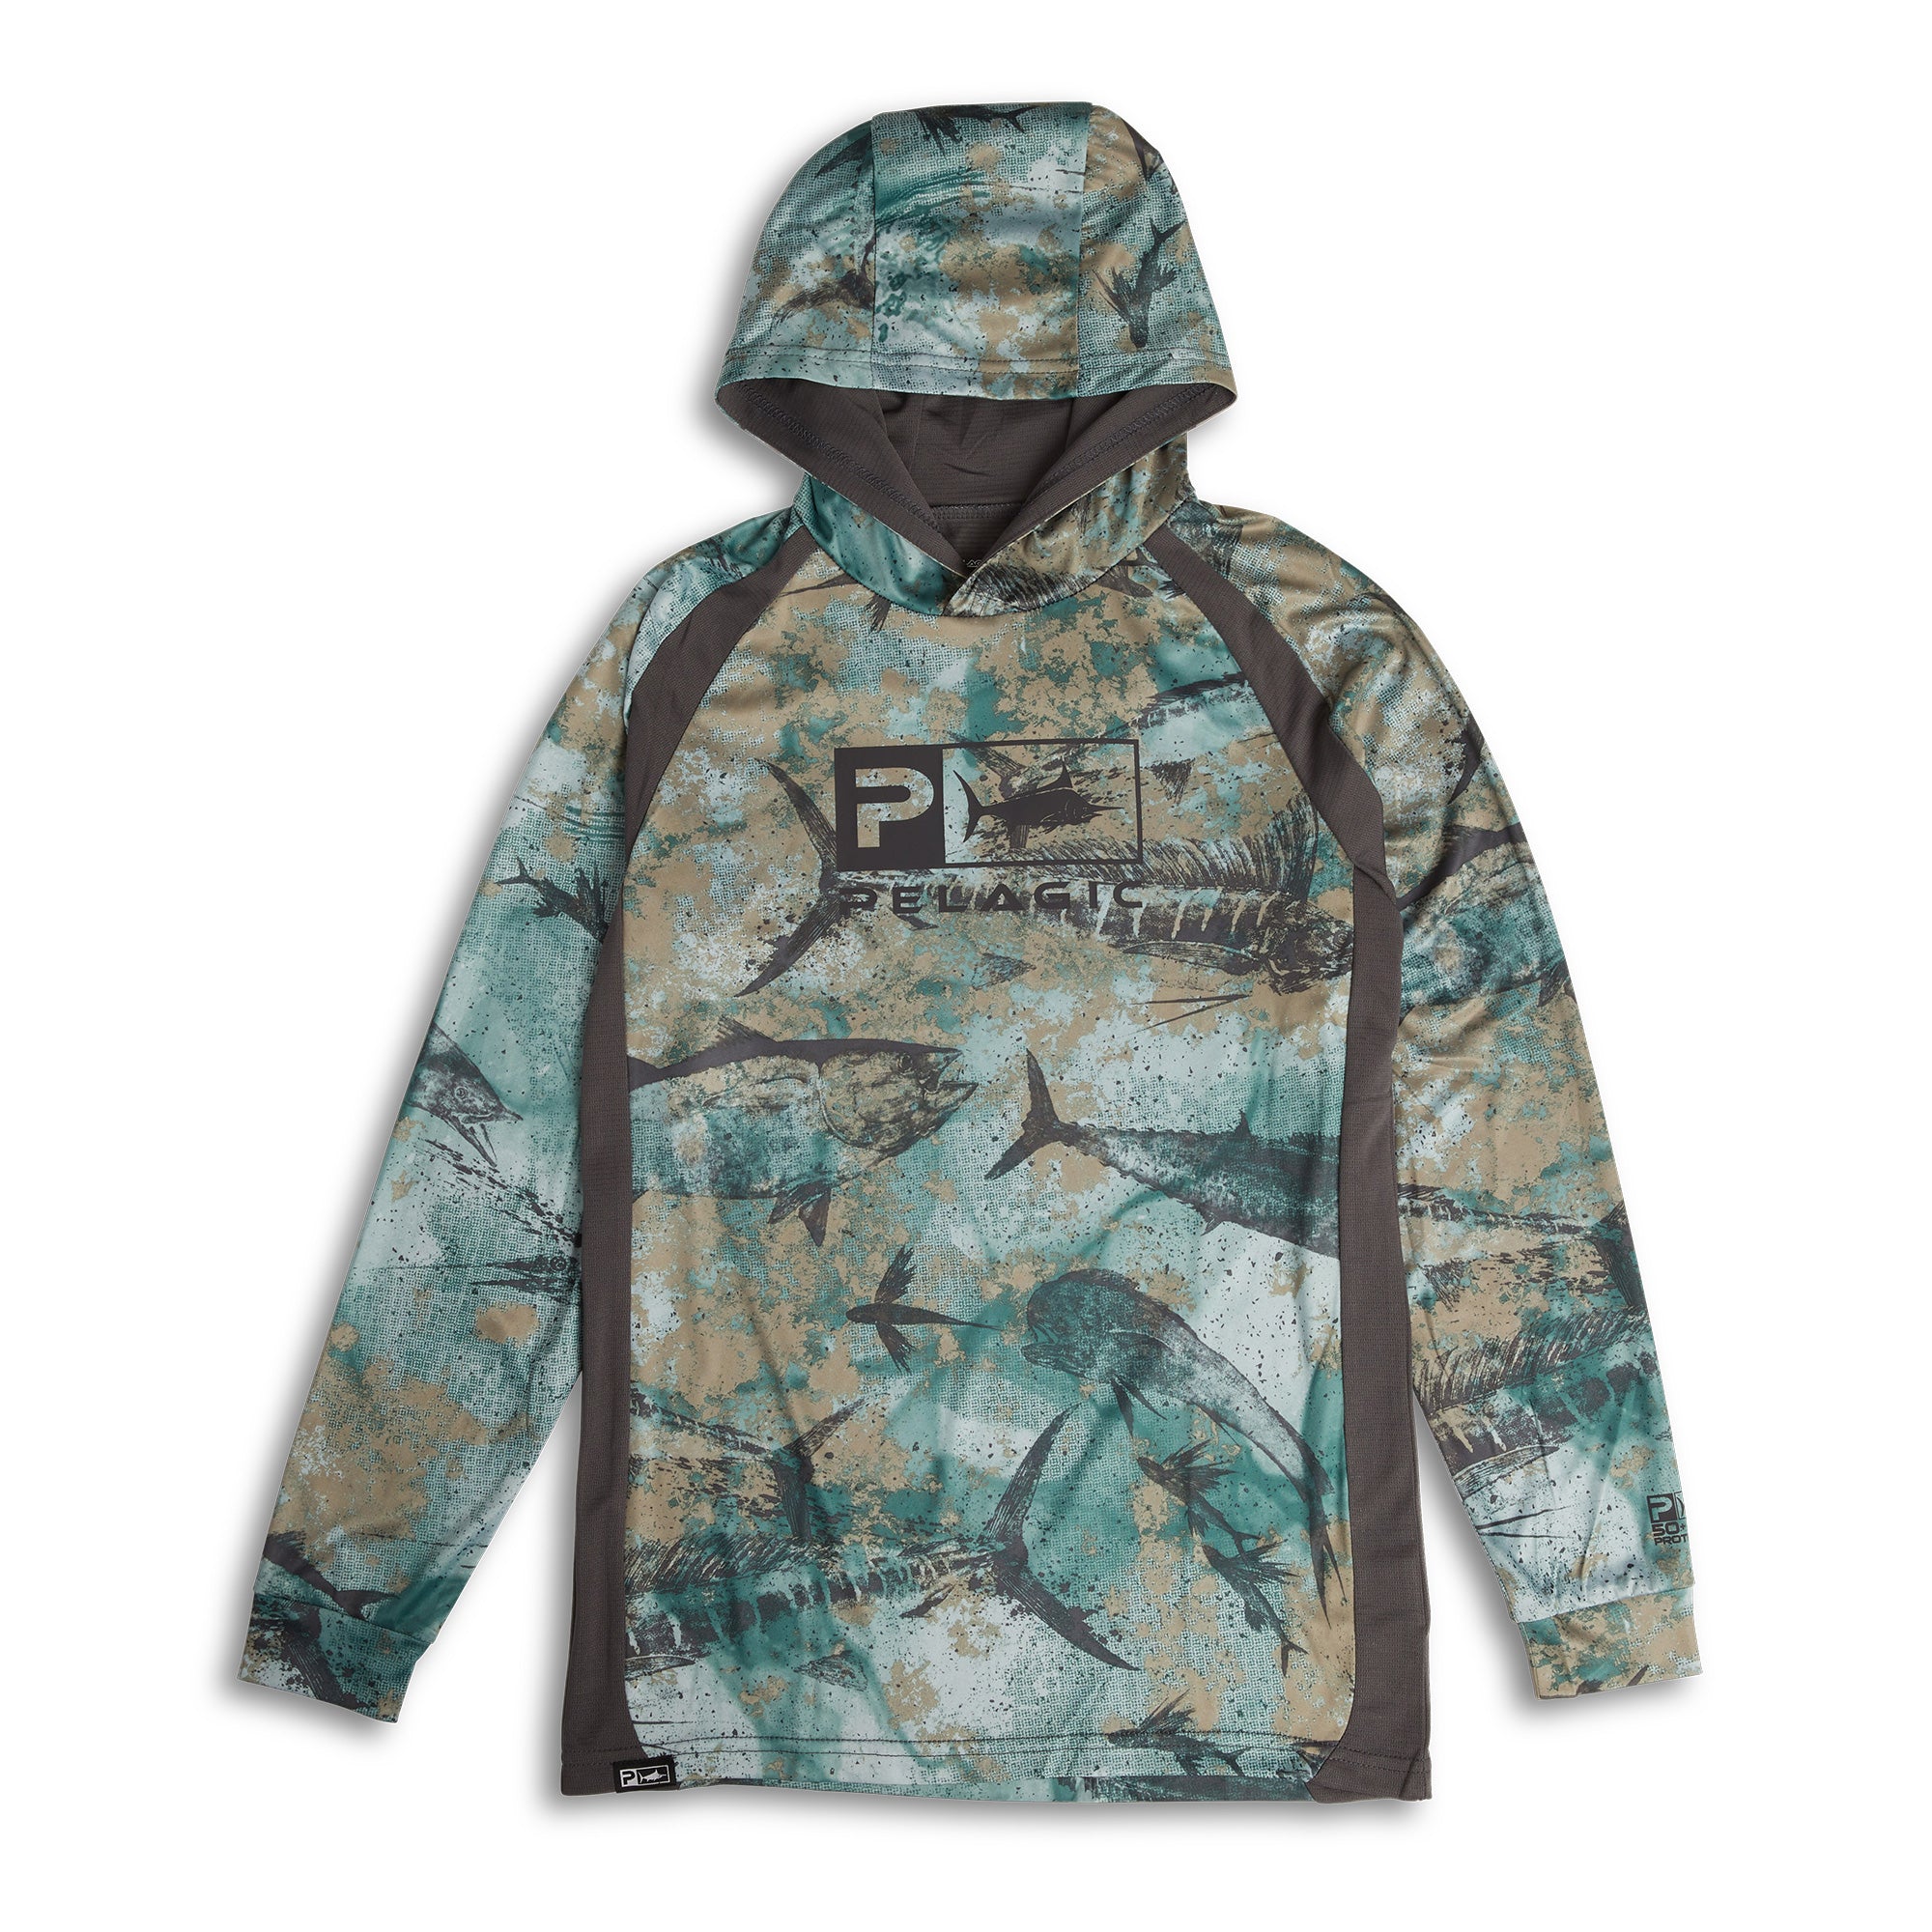 Mahi Performance Long Sleeve Hooded Shirt for Men's in Gray, Size Small from Realtree